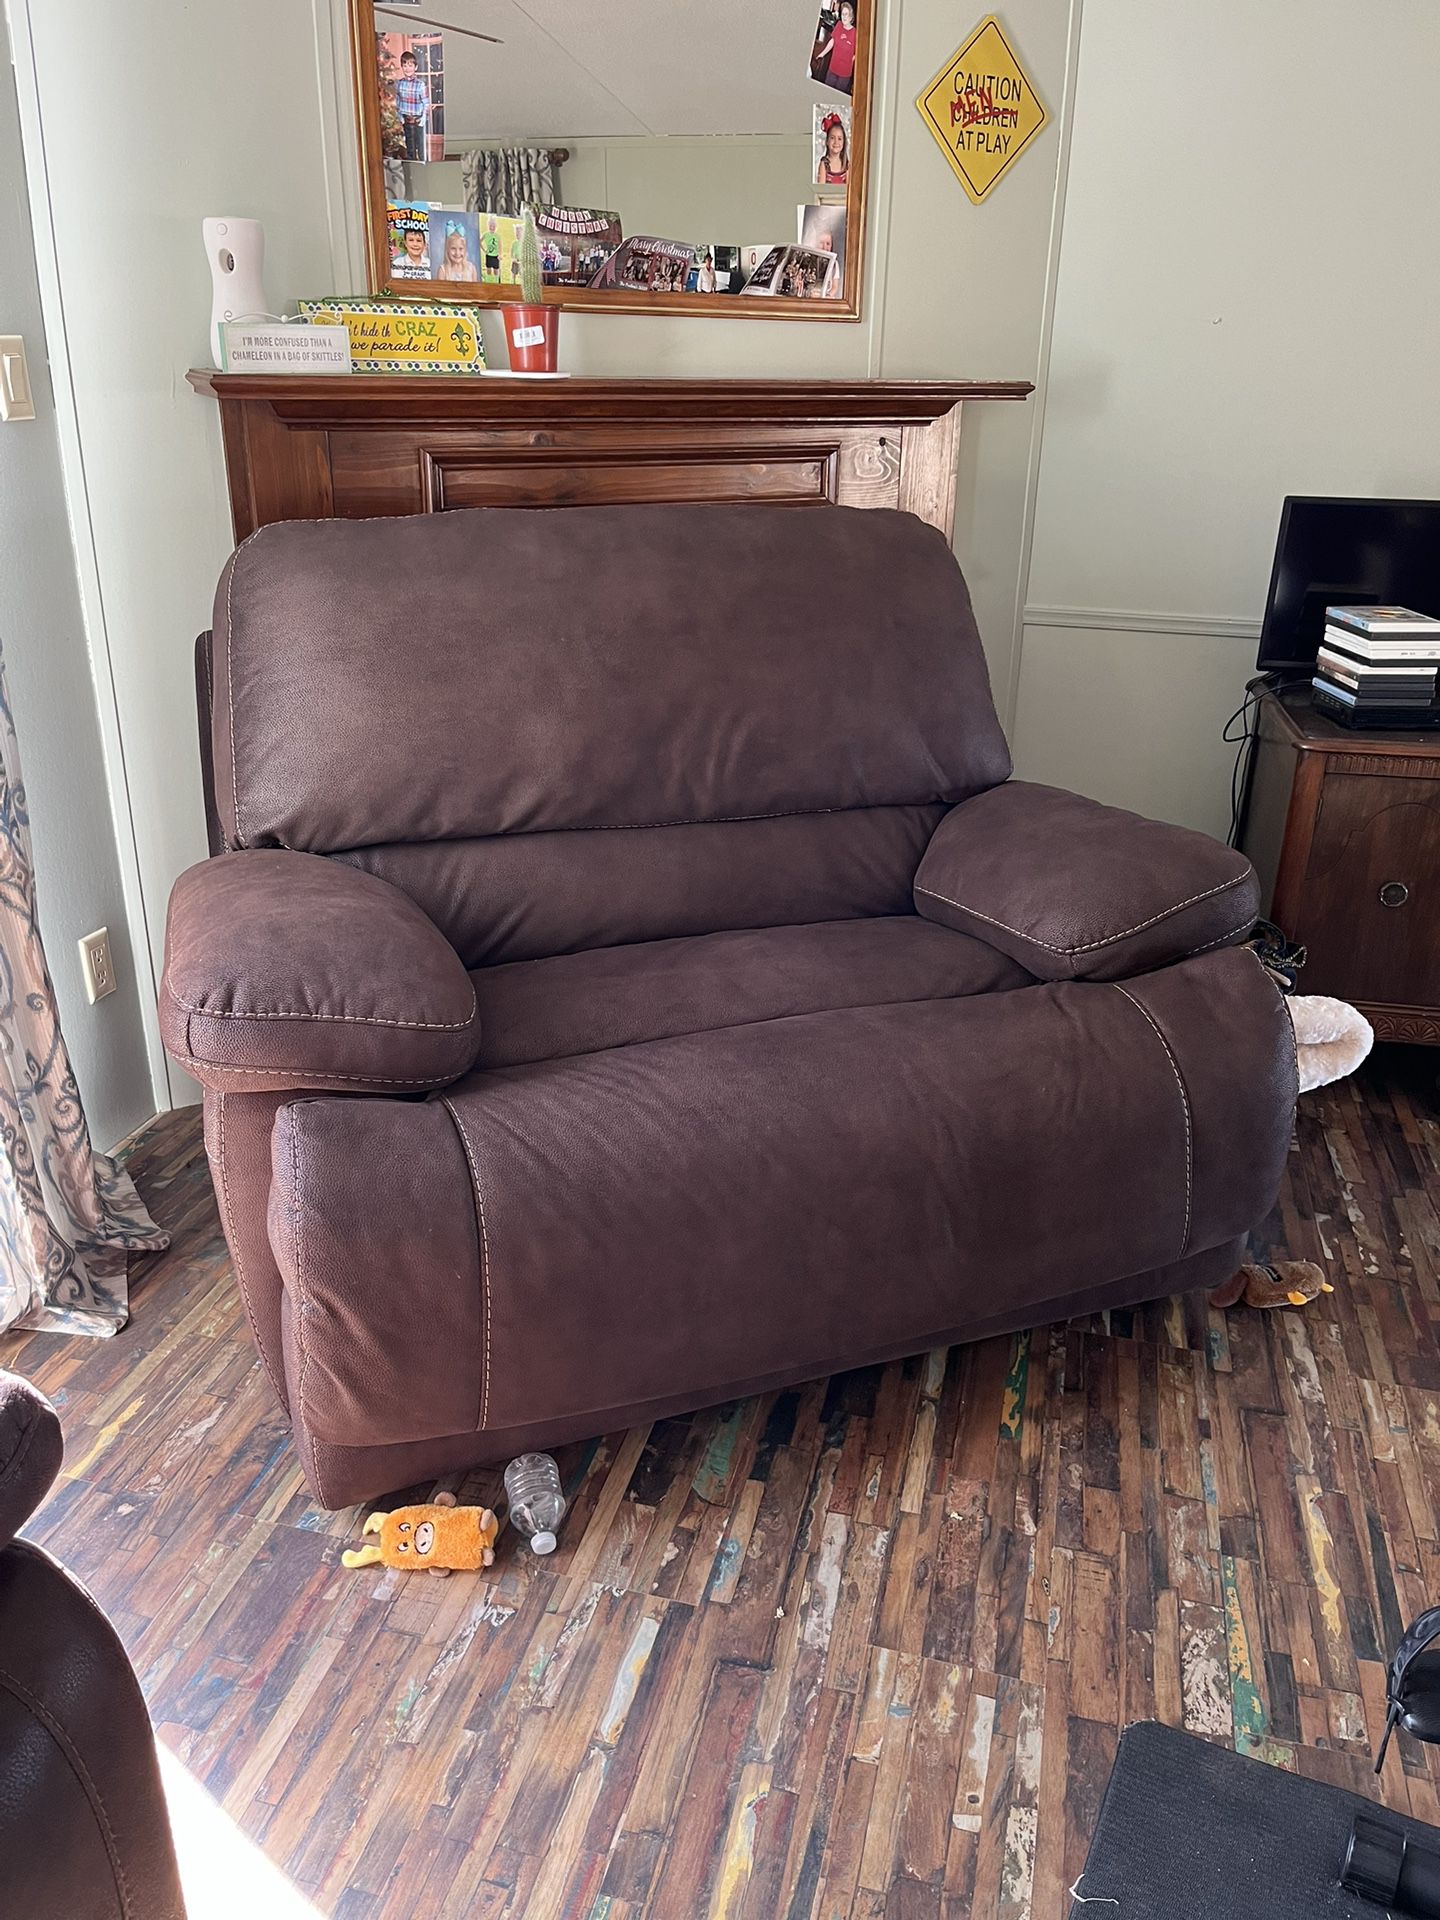 Matching Sofa And Recliner